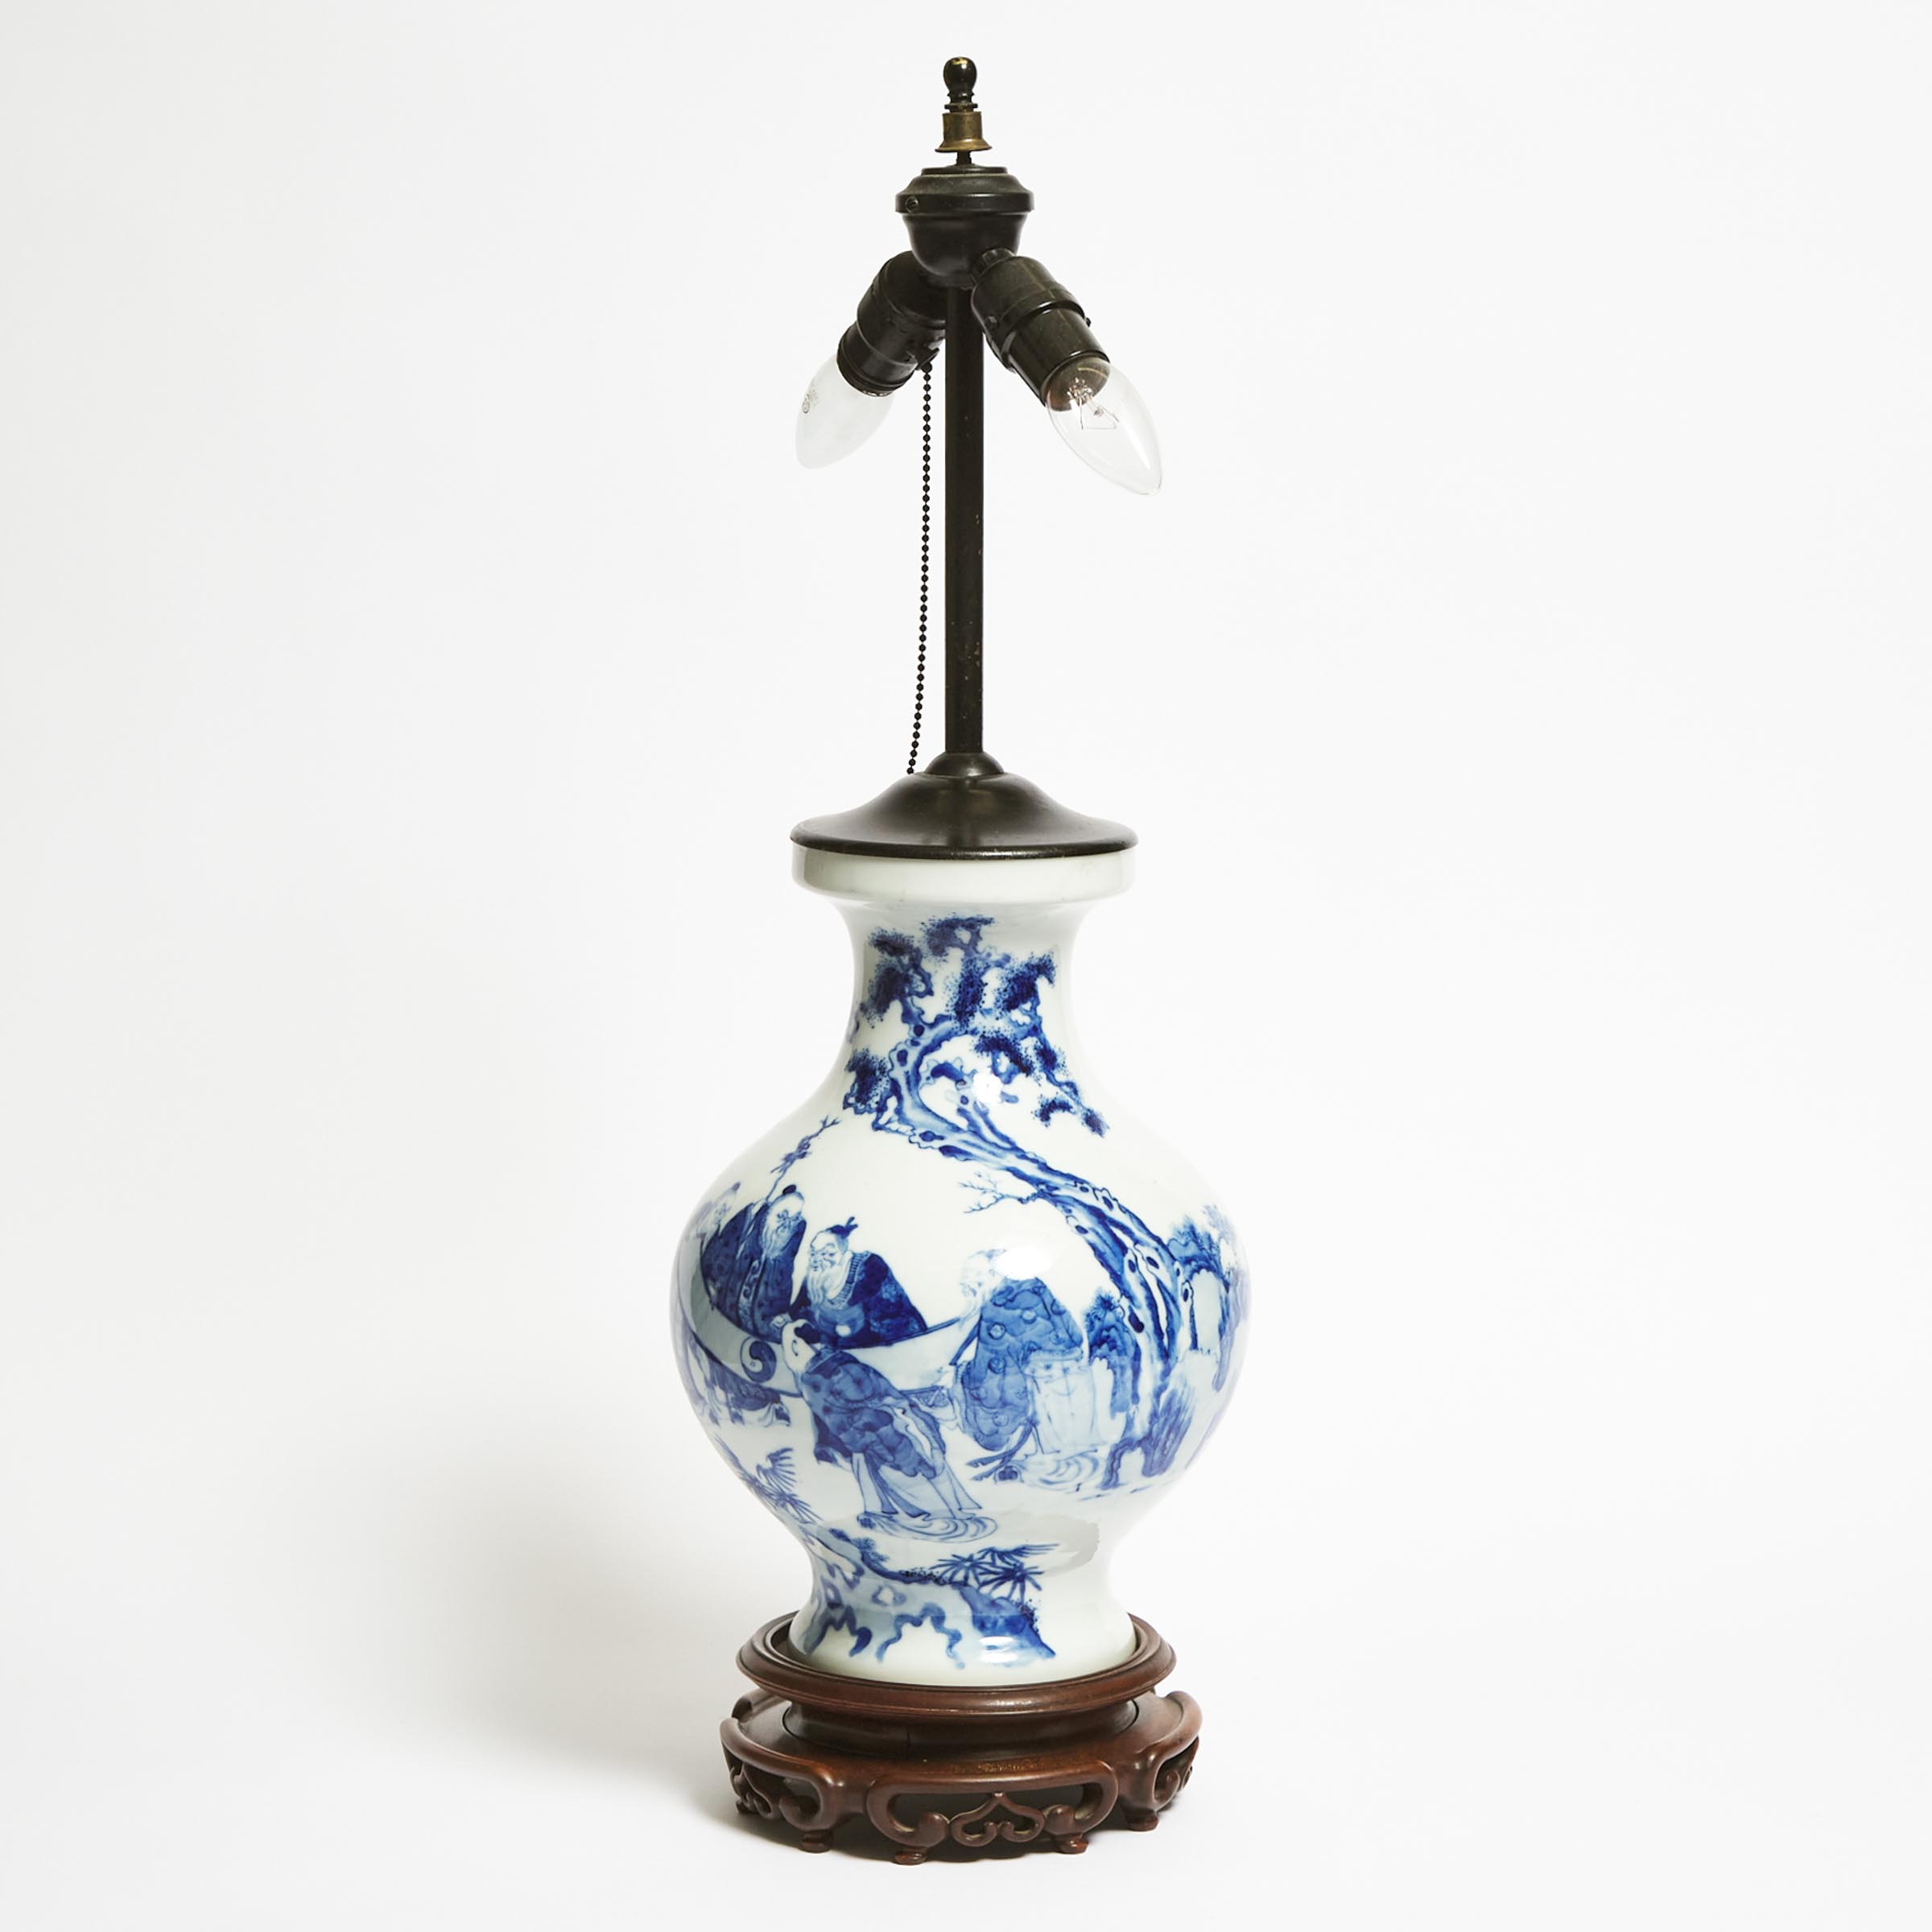 A Blue and White 'Daoist Figures' Vase Lamp, 19th Century